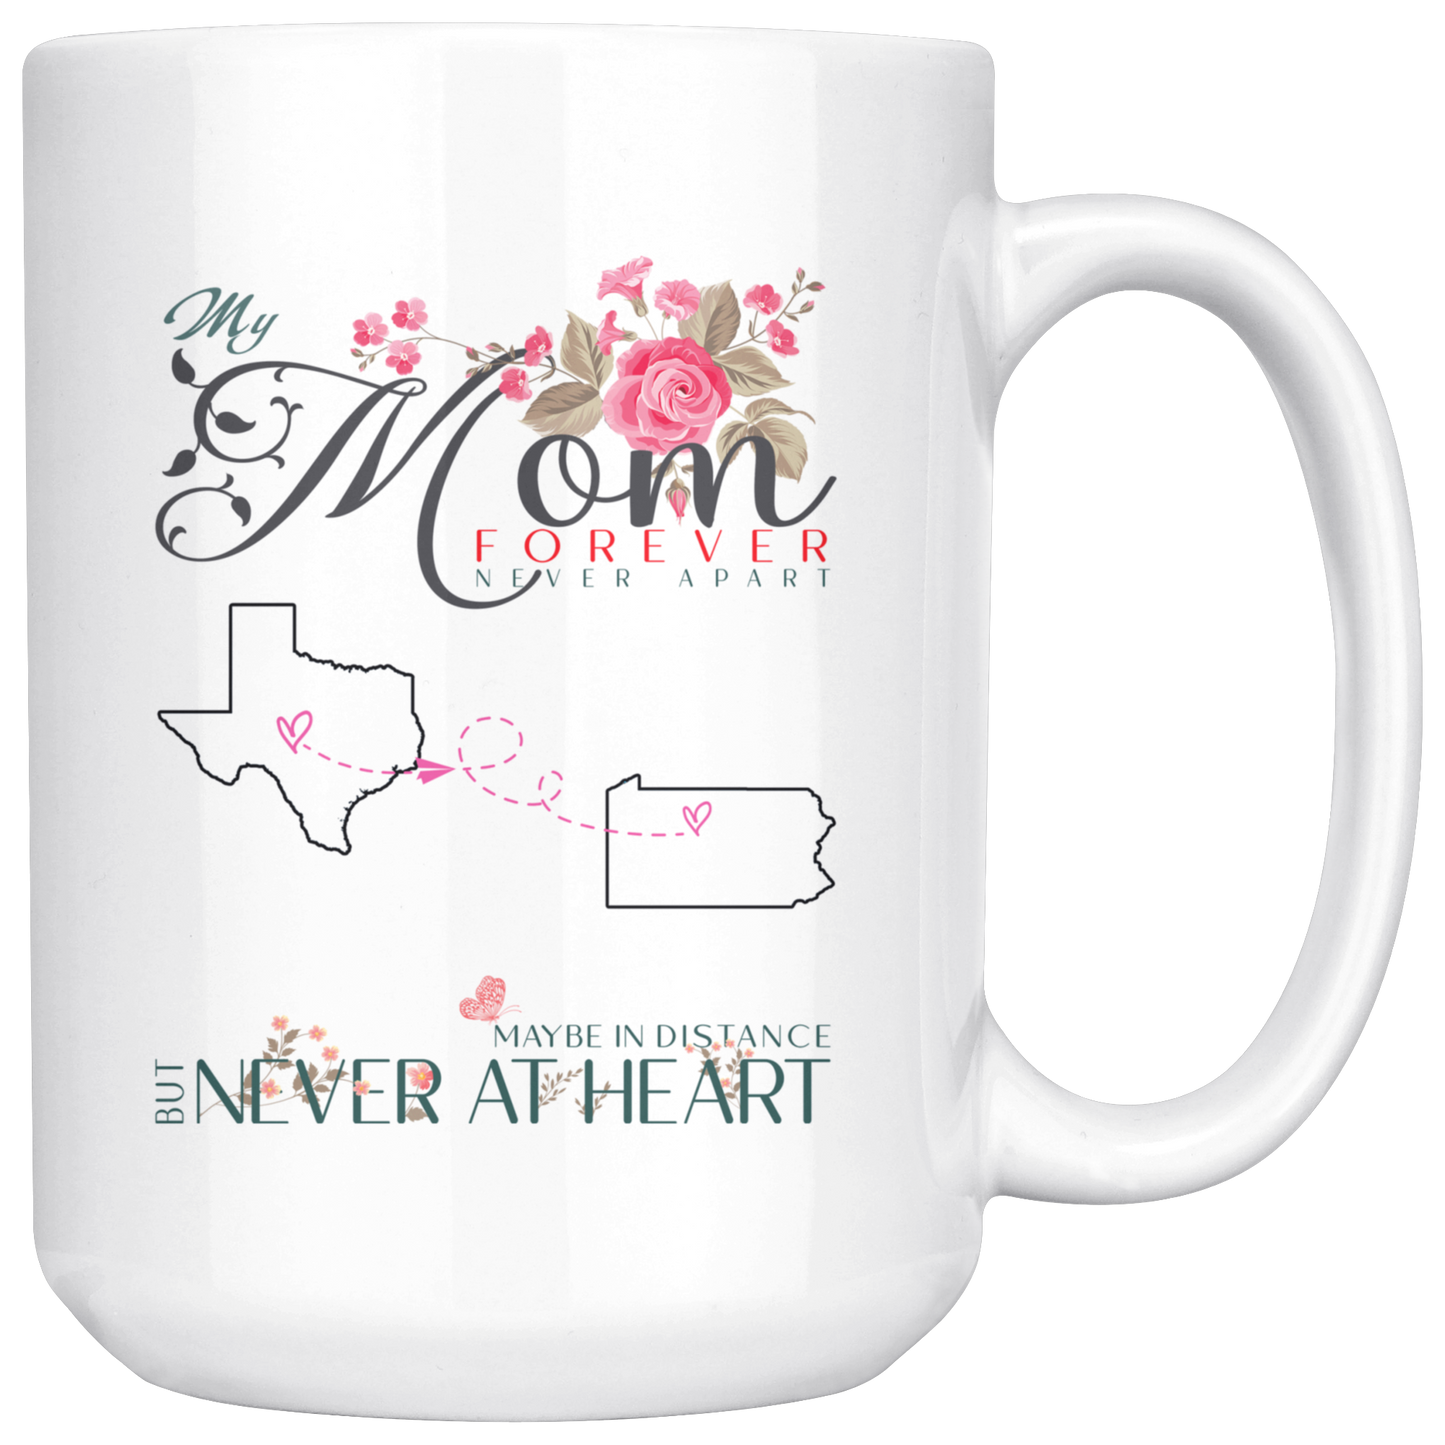 M-20321571-sp-24059 - [ Texas | Pennsylvania ]Personalized Mothers Day Coffee Mug - My Mom Forever Never A